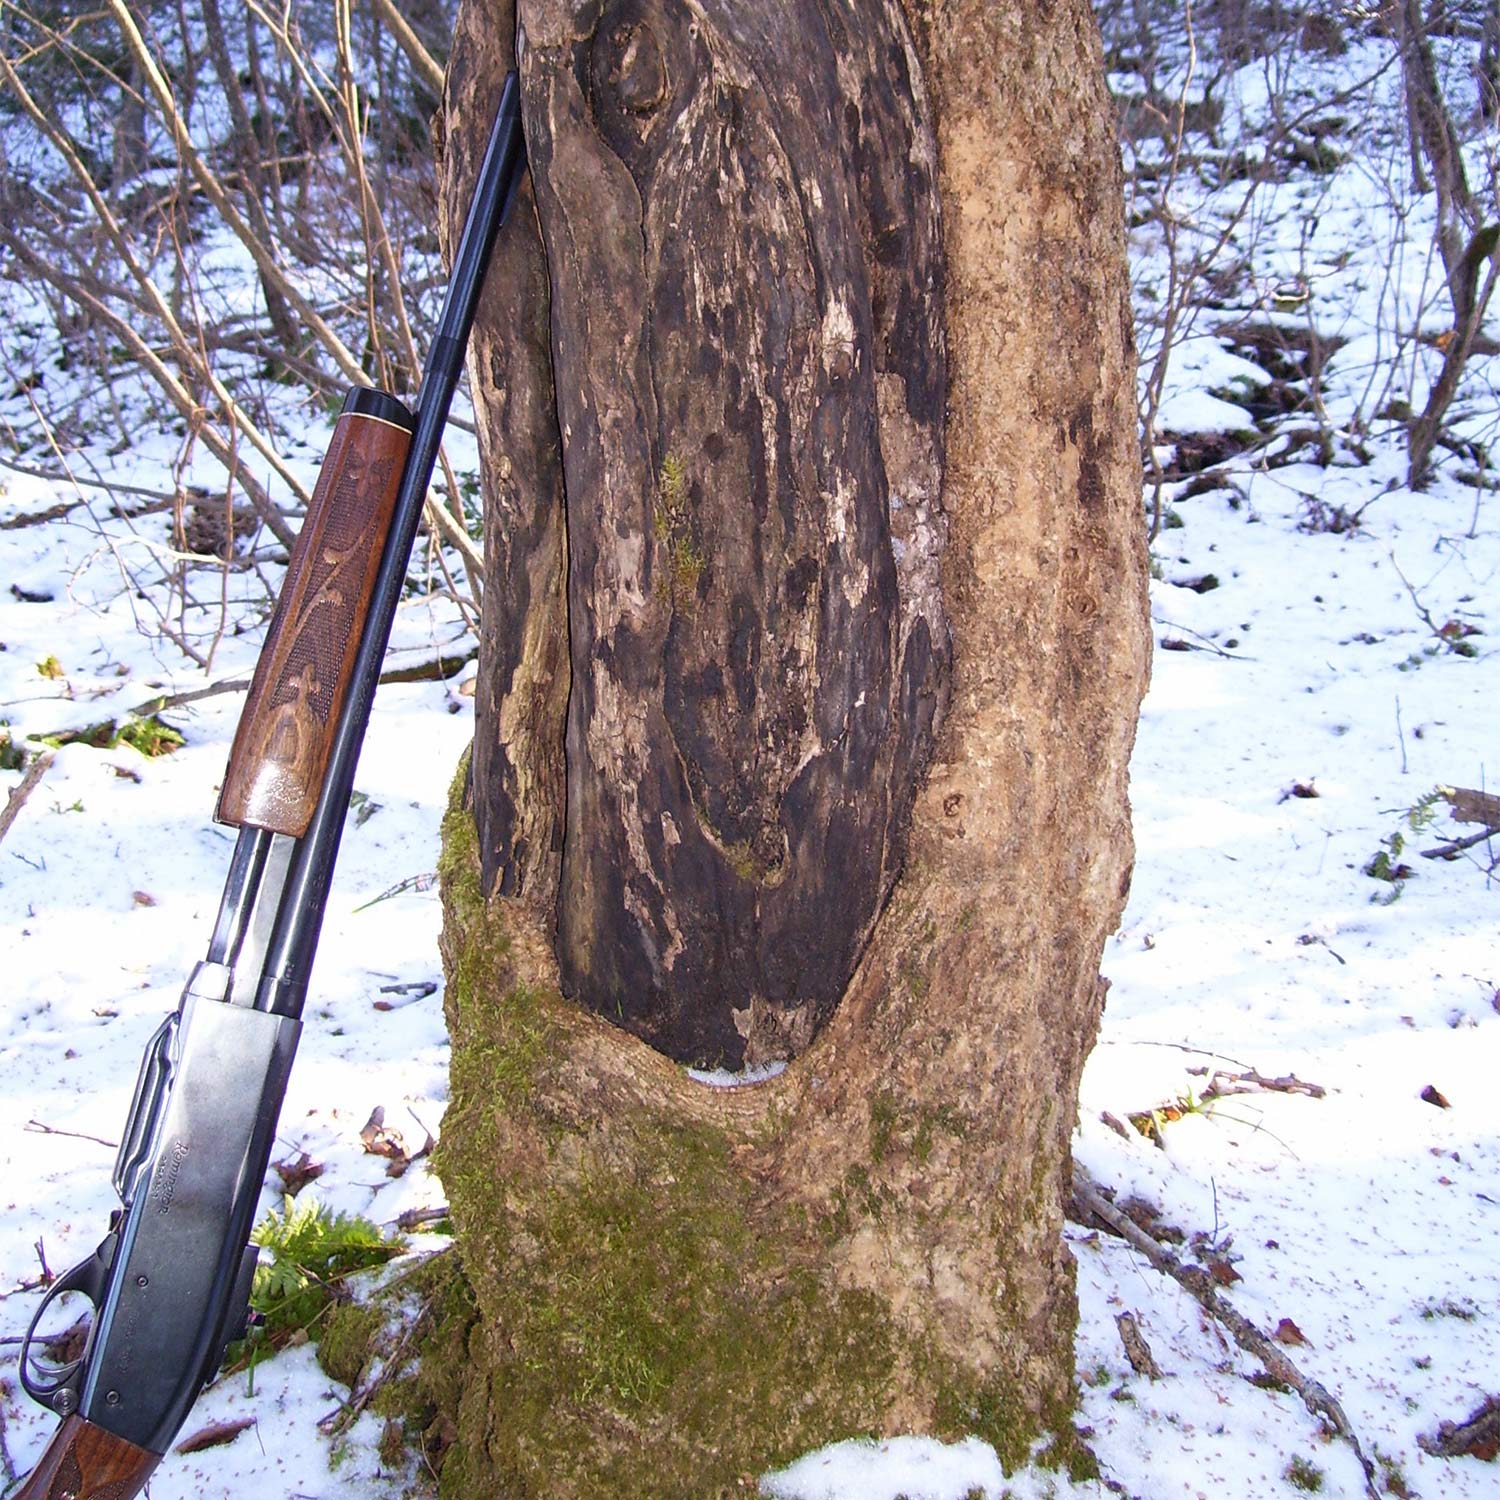 rifle leaning against a tree in the snow